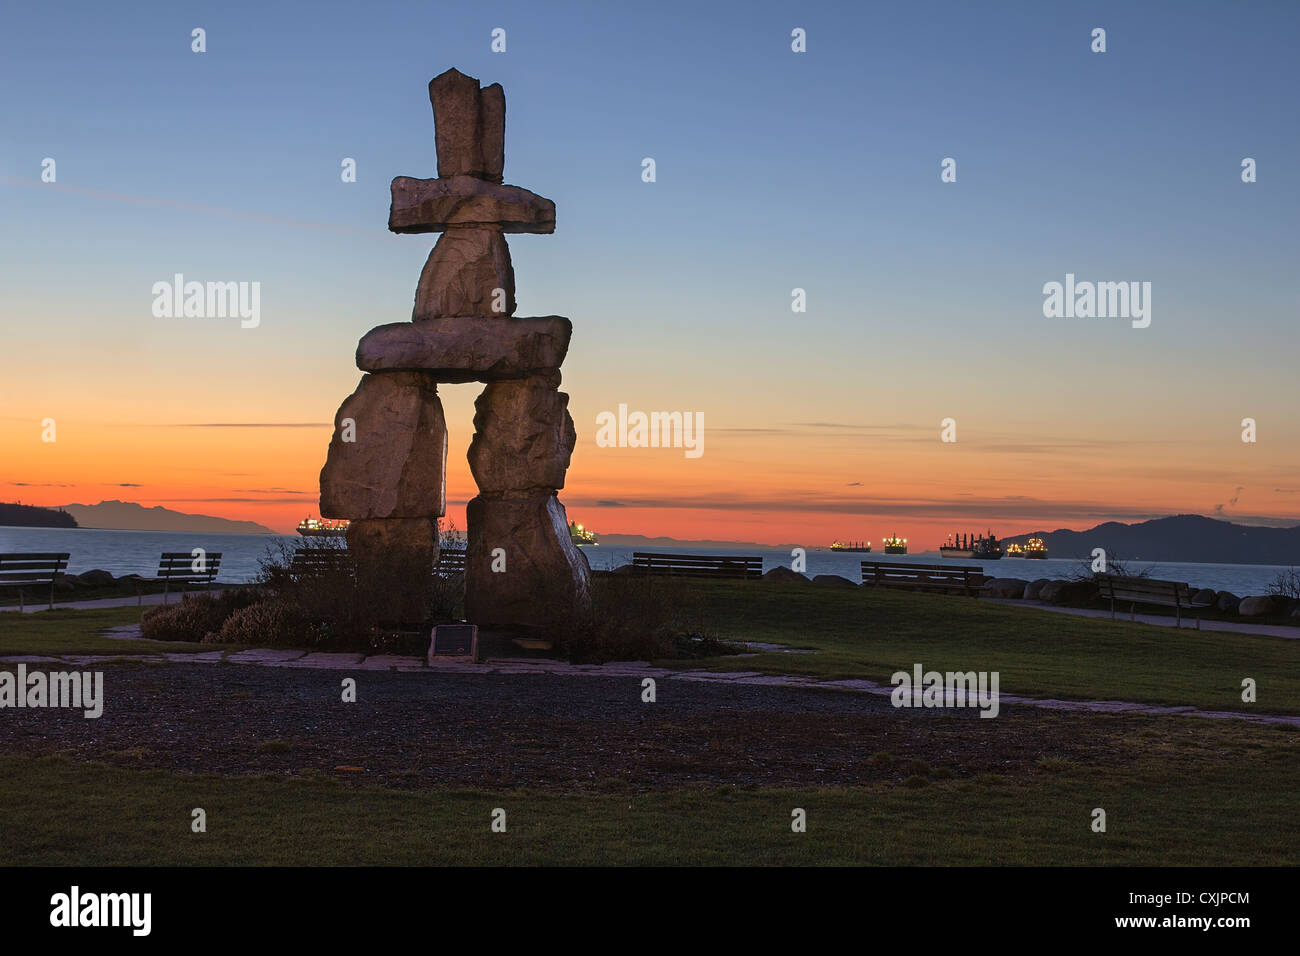 Inukshuk Stone Sculpture on Sunset Beach Alond English Bay in Vancouver BC Canada during Sunset Stock Photo